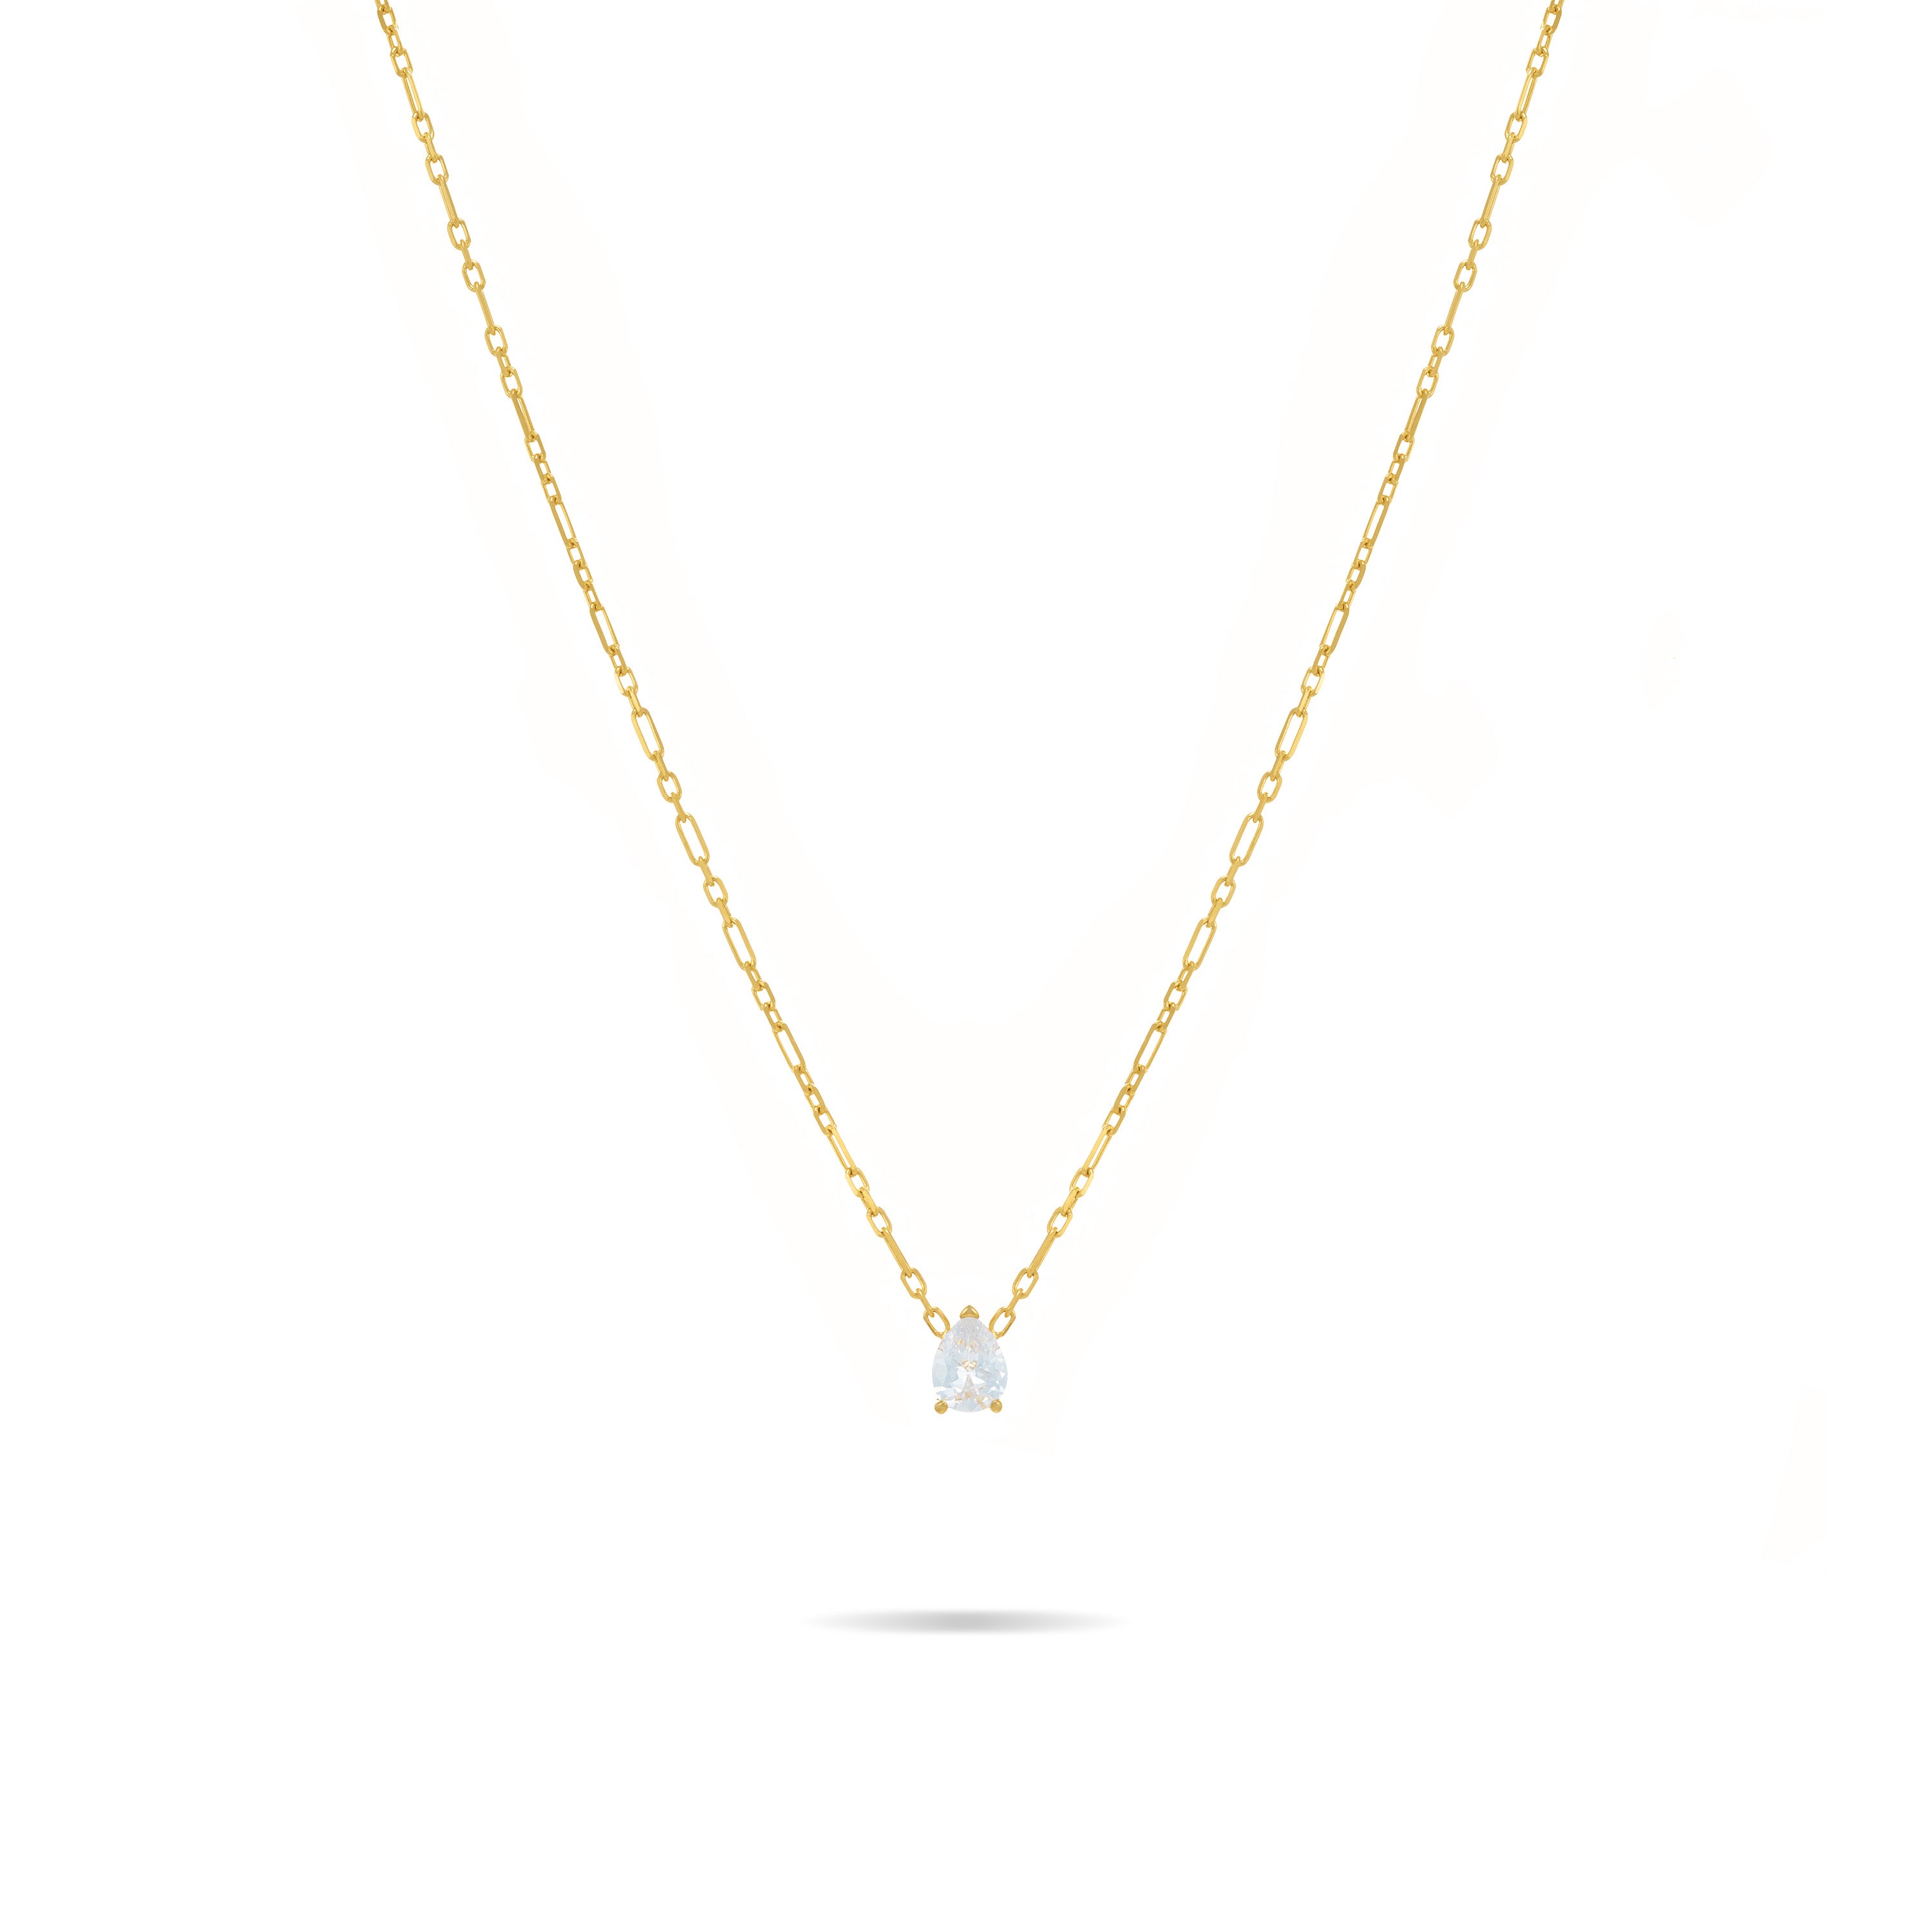 One Teardrop Thin Paperclip Link Chain Necklace